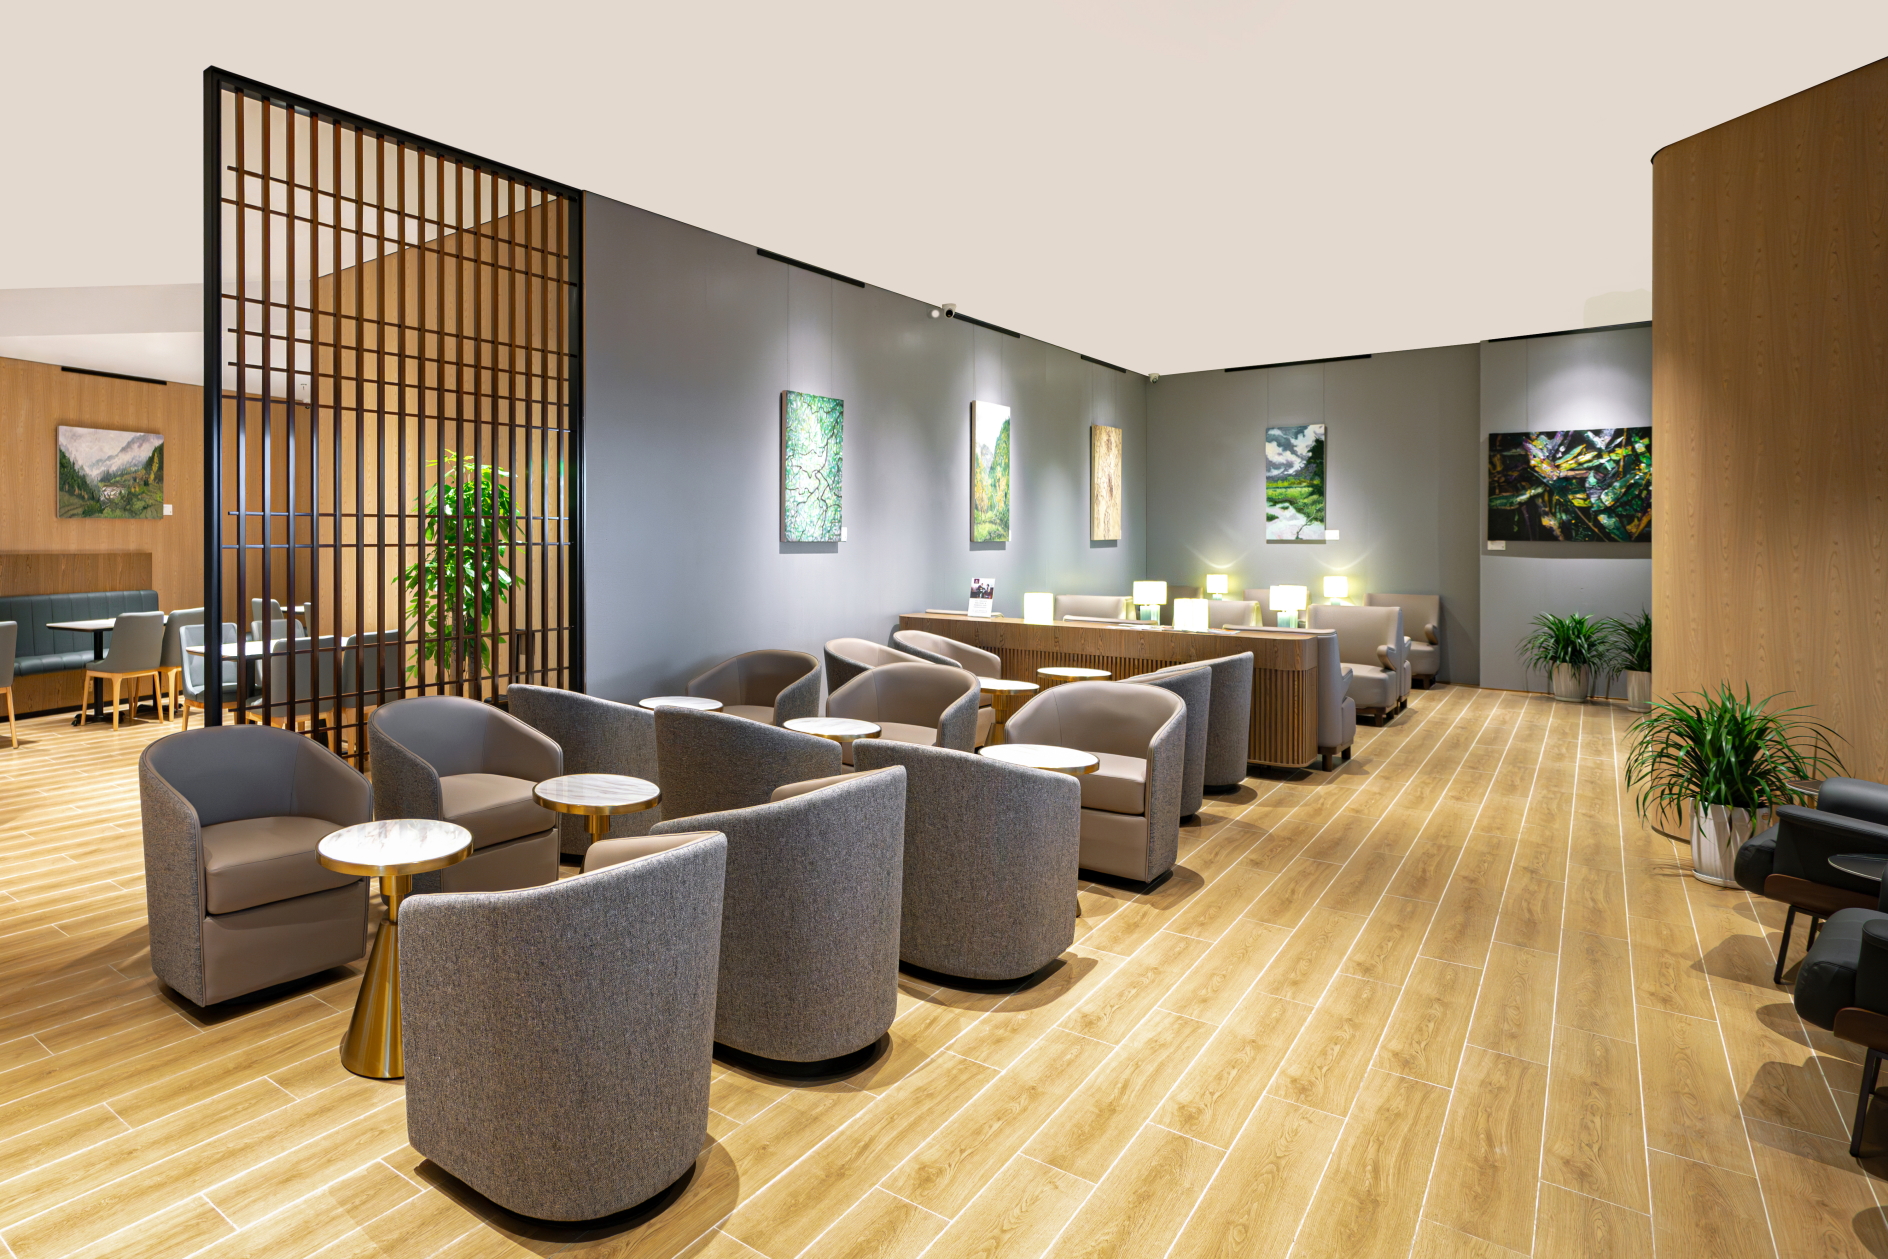 Plaza Premium is opening three lounges at Chongqing Jiangbei Airport (CGK) in China. Click to enlarge.